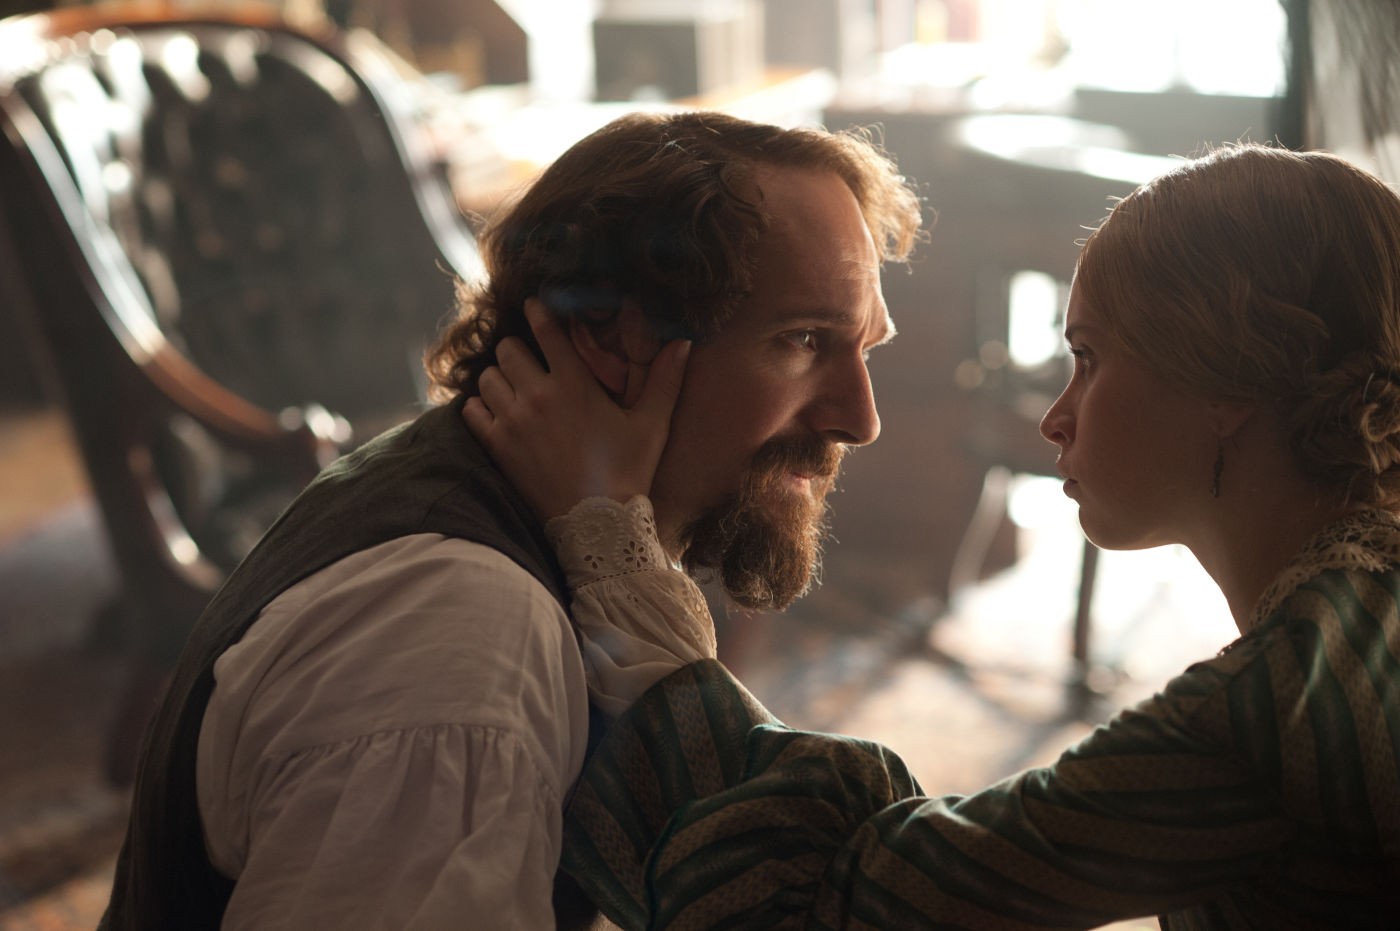 Ralph Fiennes stars as Charles Dickens and Felicity Jones stars as Nelly Ternan in Sony Pictures Classics' The Invisible Woman (2013). Photo credit by David Appleby.